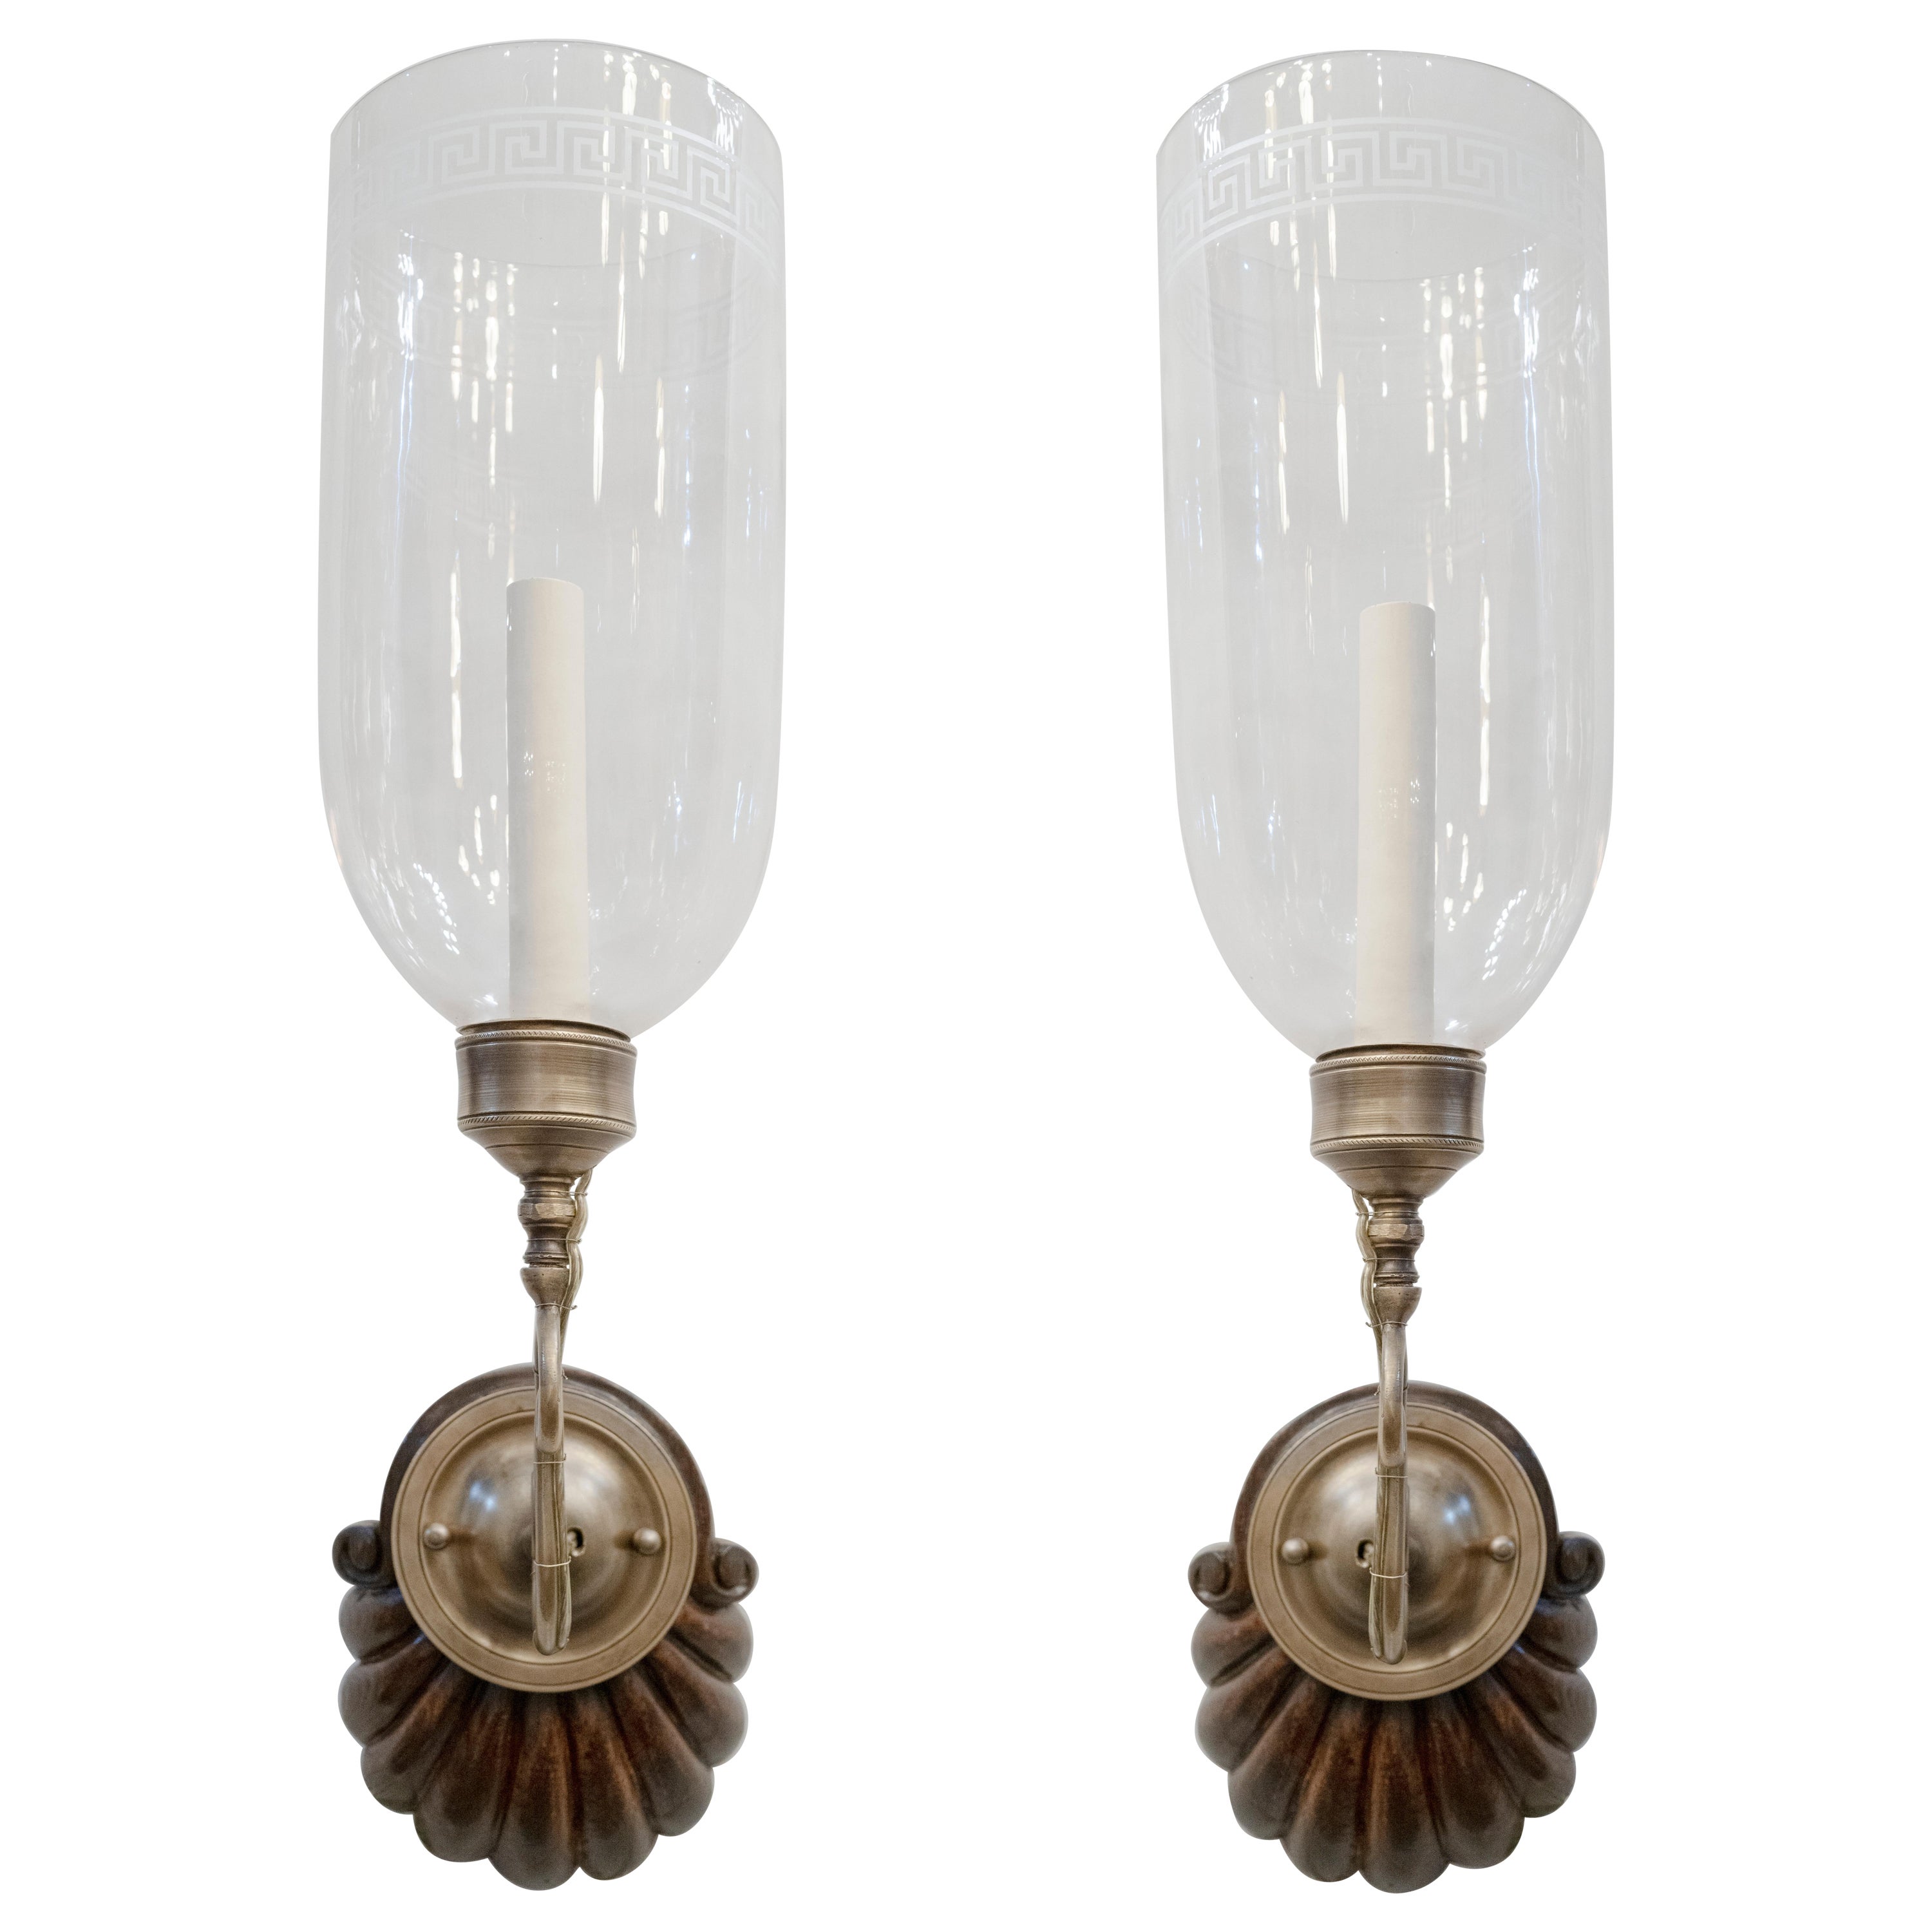 David Duncan Wall Lights and Sconces